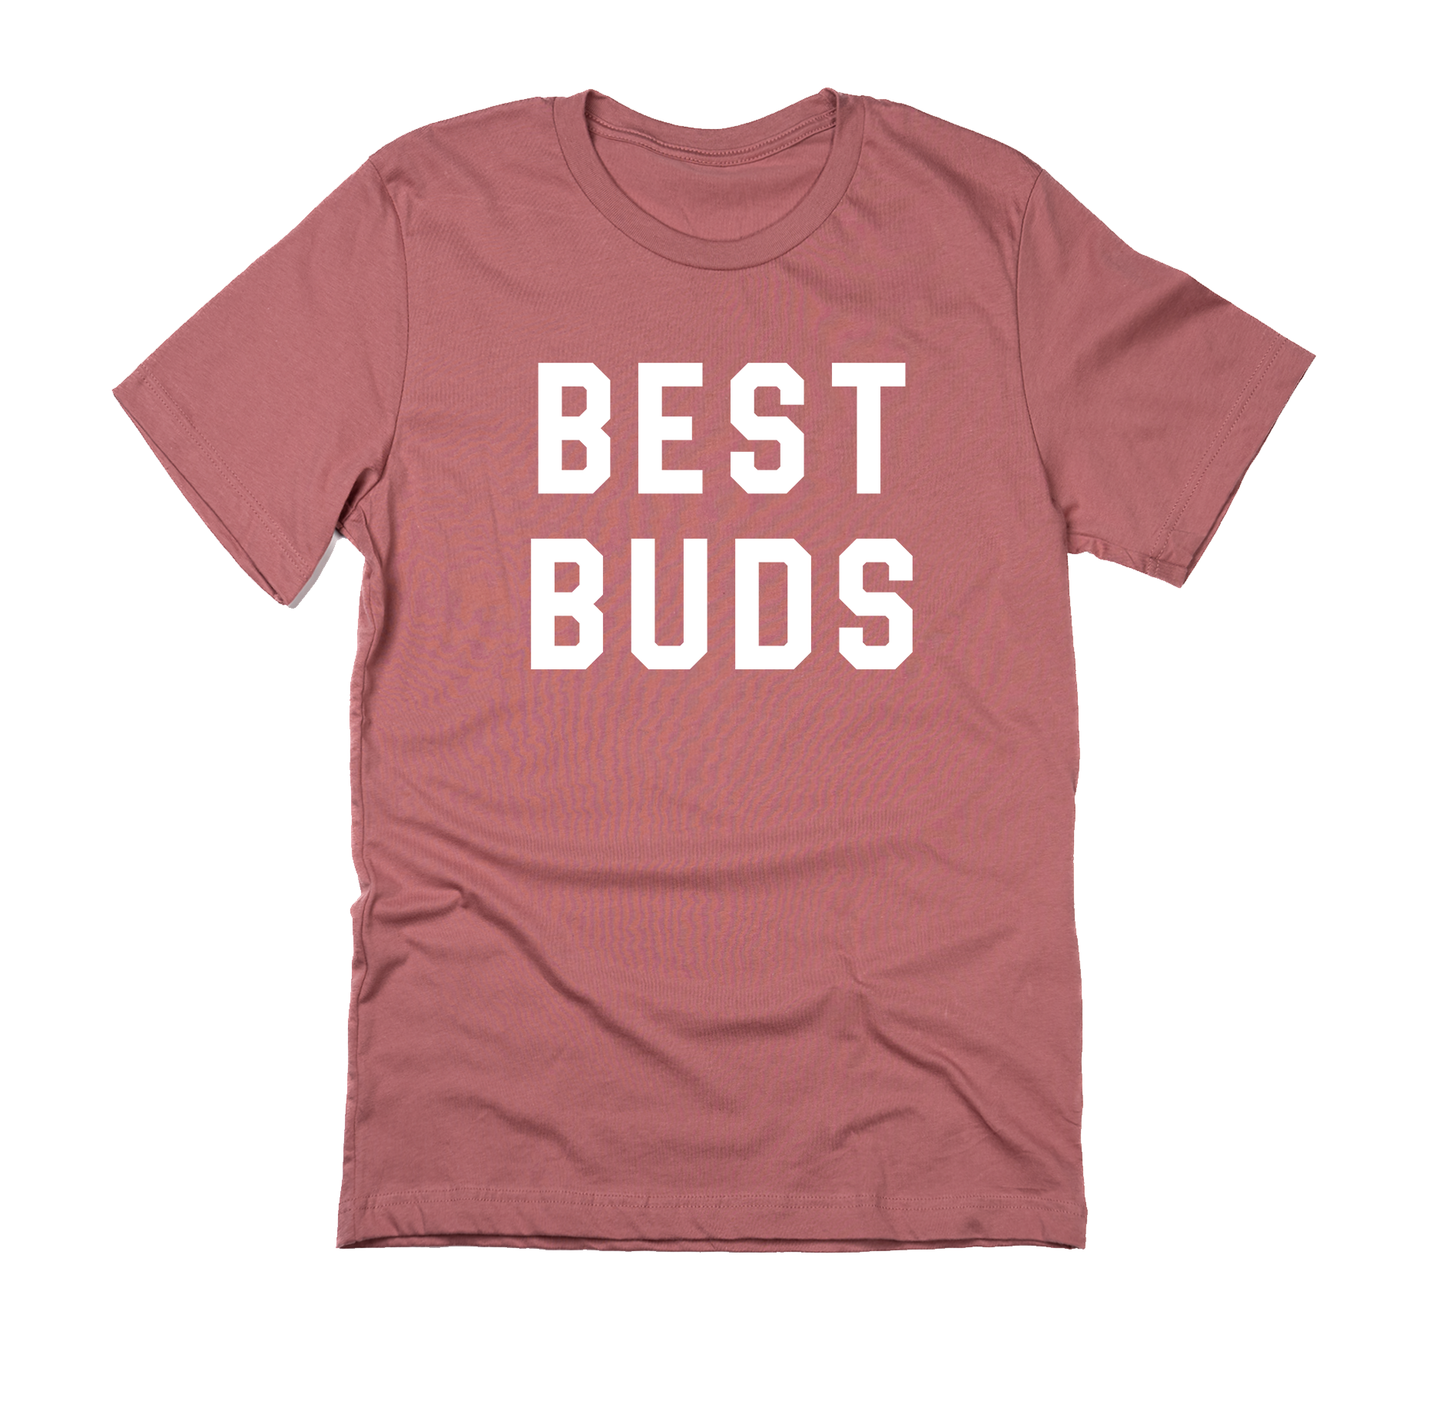 Best Buds (Across Front, White) - Tee (Mauve)